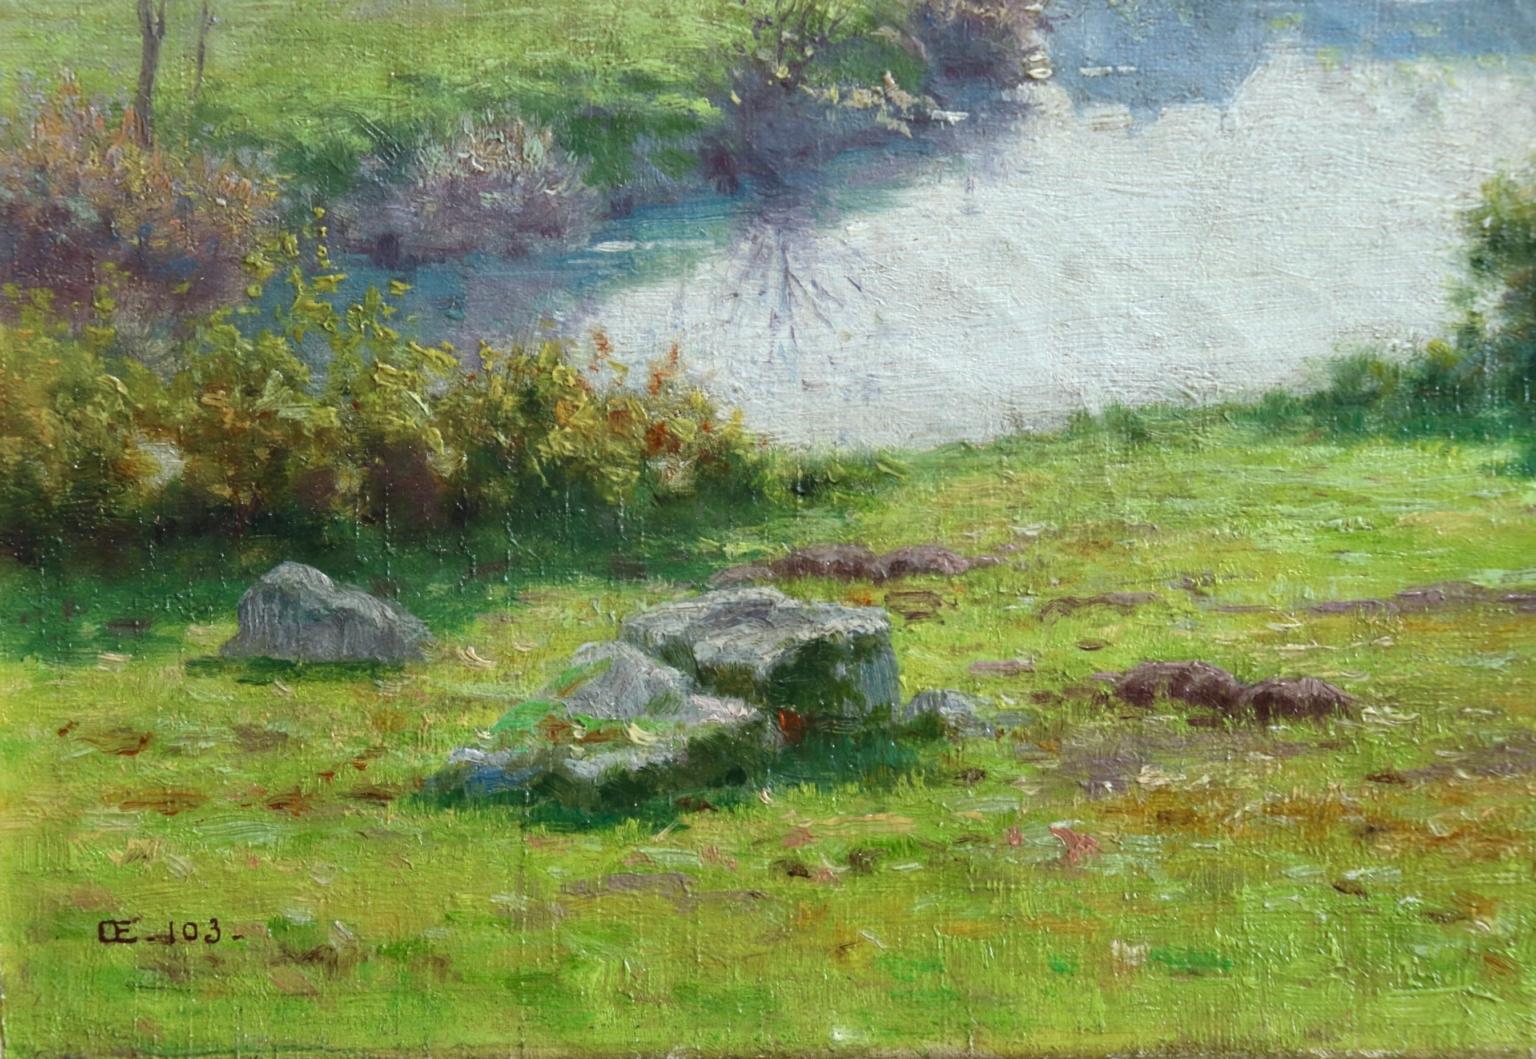 A Summer's Day - Impressionist Oil, Cattle by River in Landscape by J Monchablon - Gray Animal Painting by Jean Ferdinand Monchablon